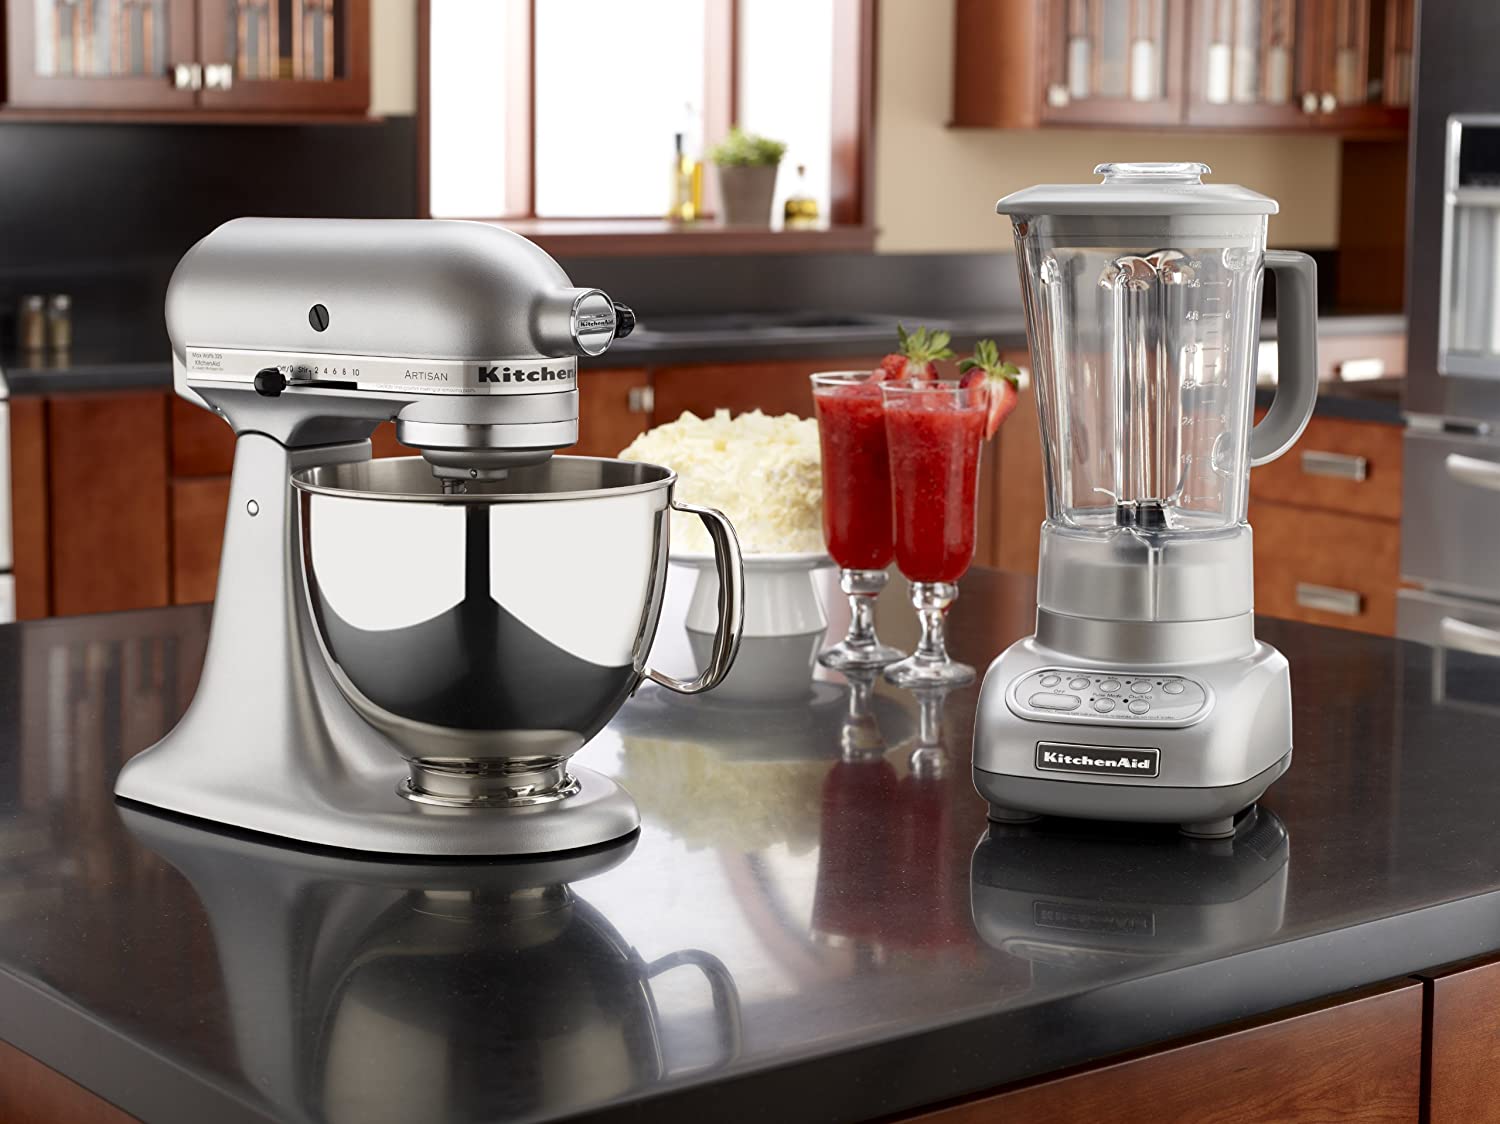 Which Kitchenaid Mixer Is Better Tilt Head Or Bowl Lift